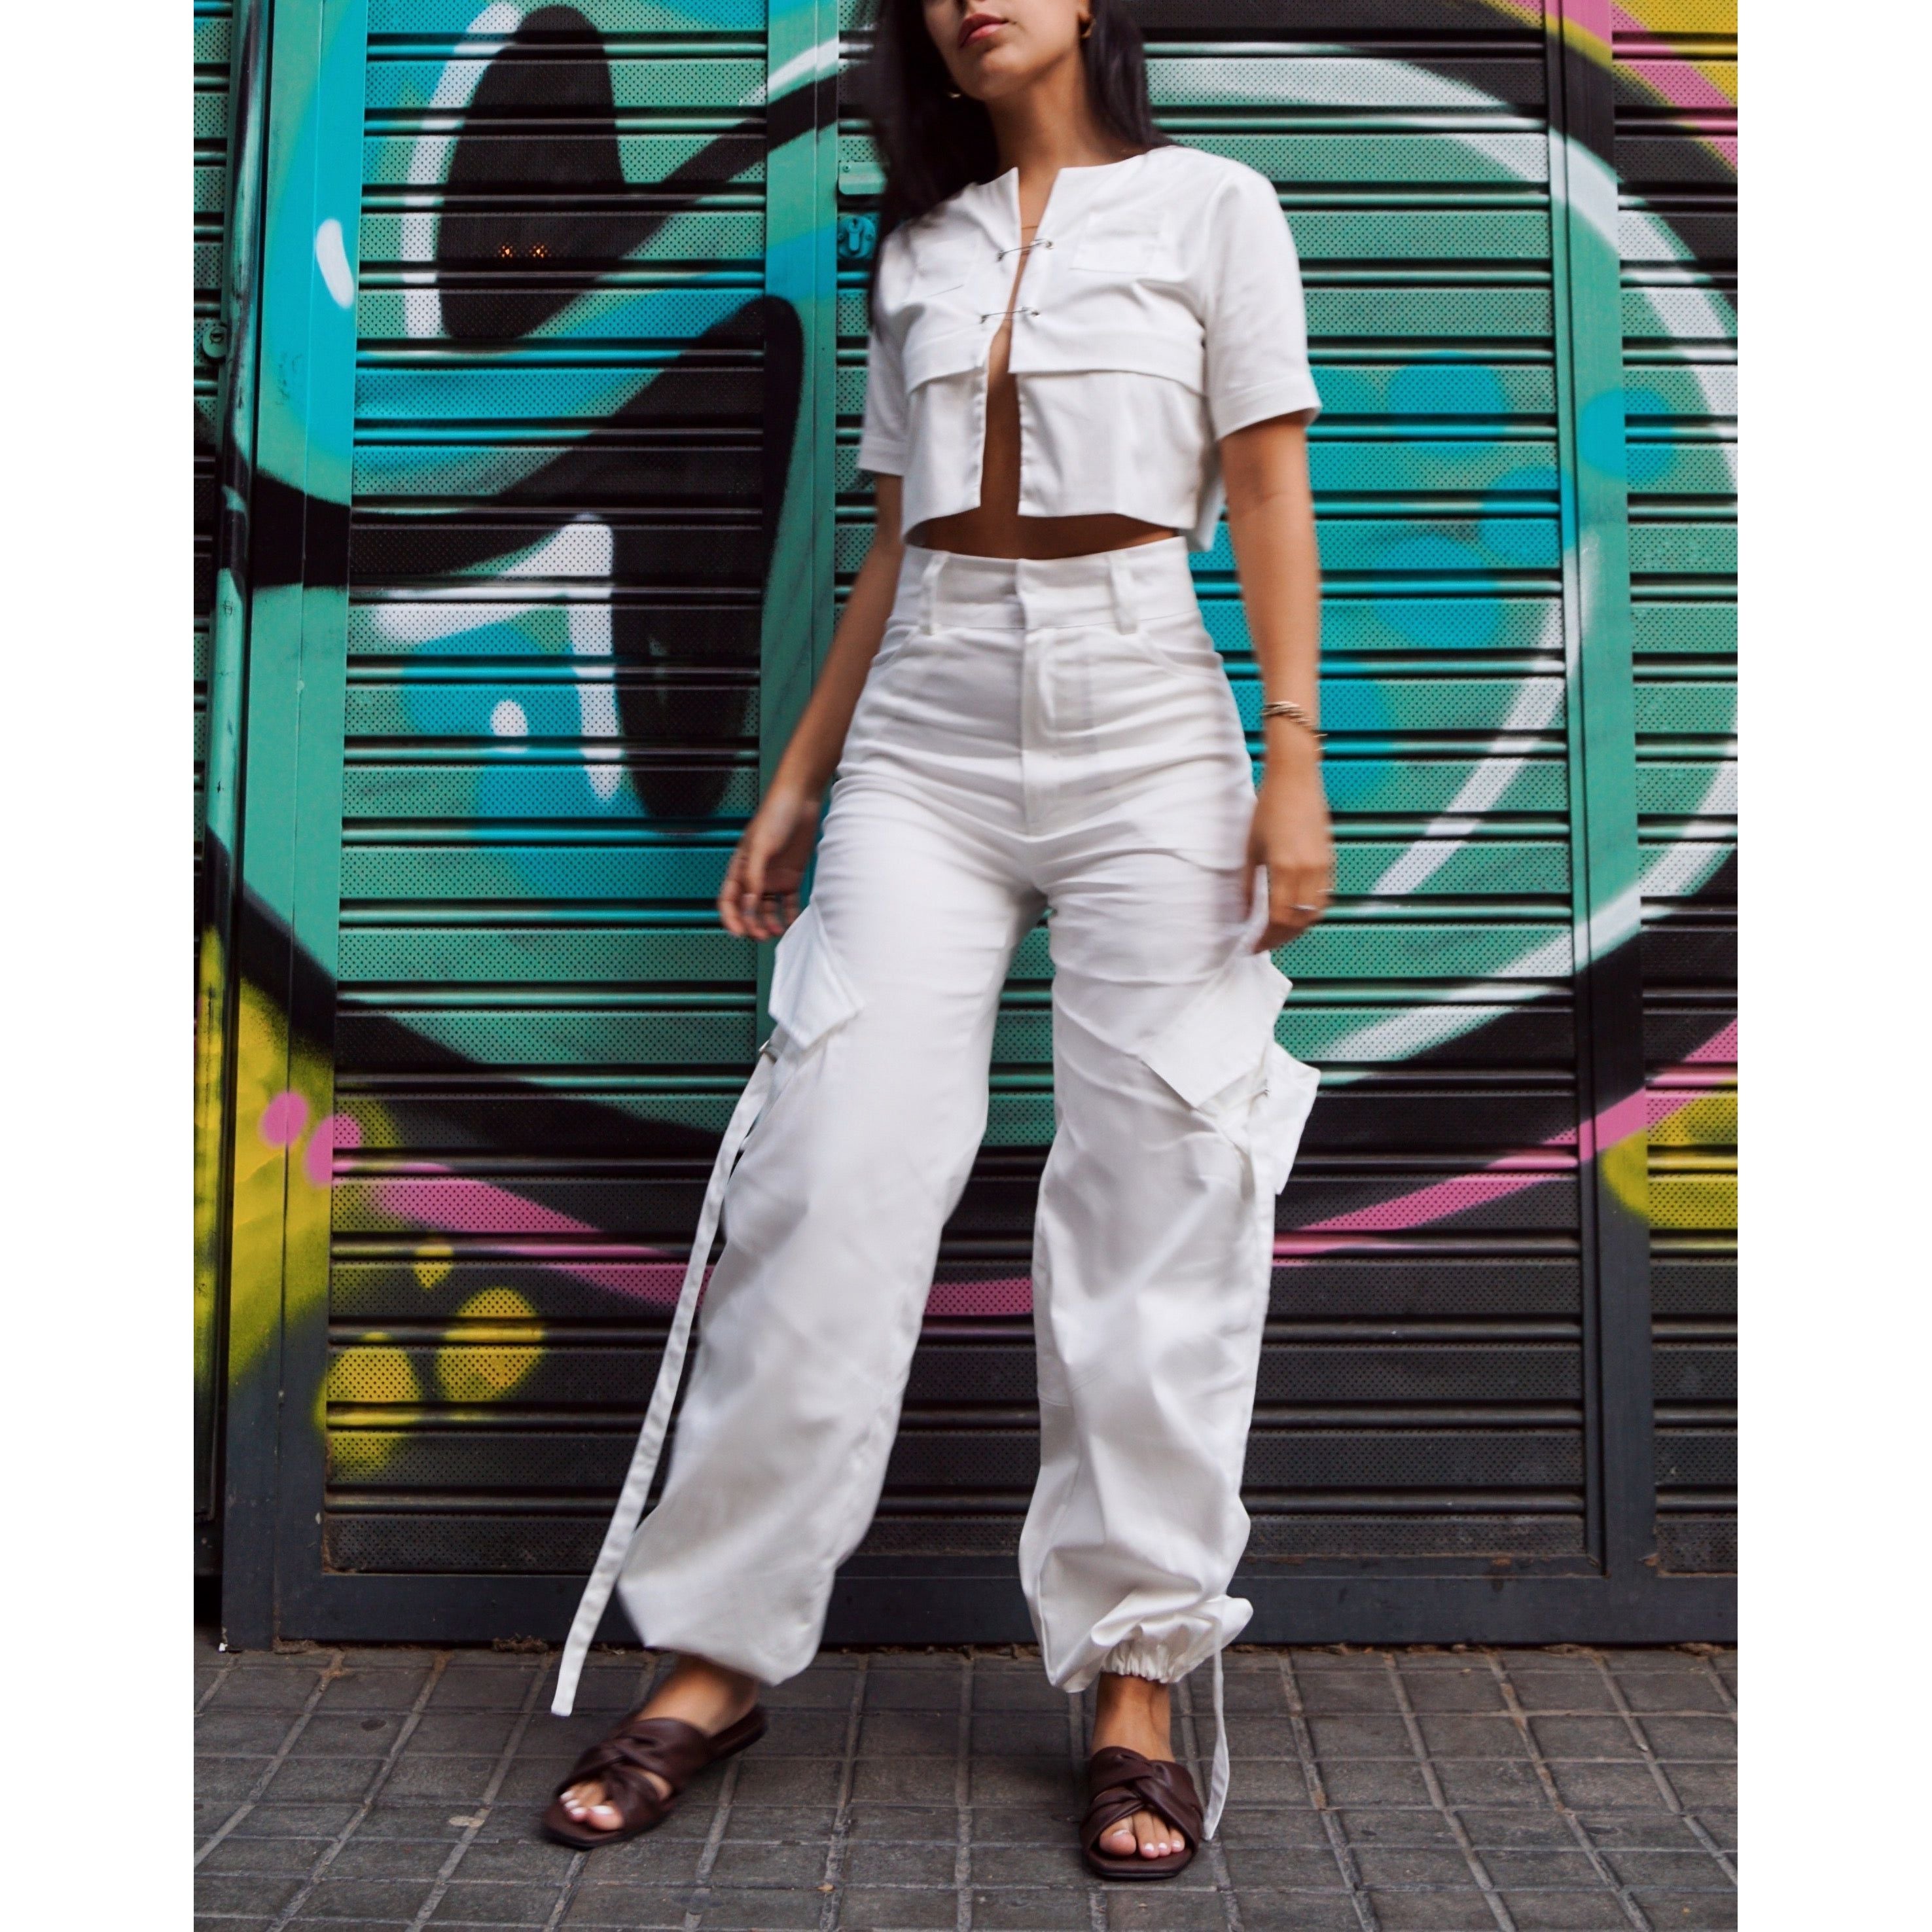 White Crop Top, an Essential Piece for Hot Days – Onpost